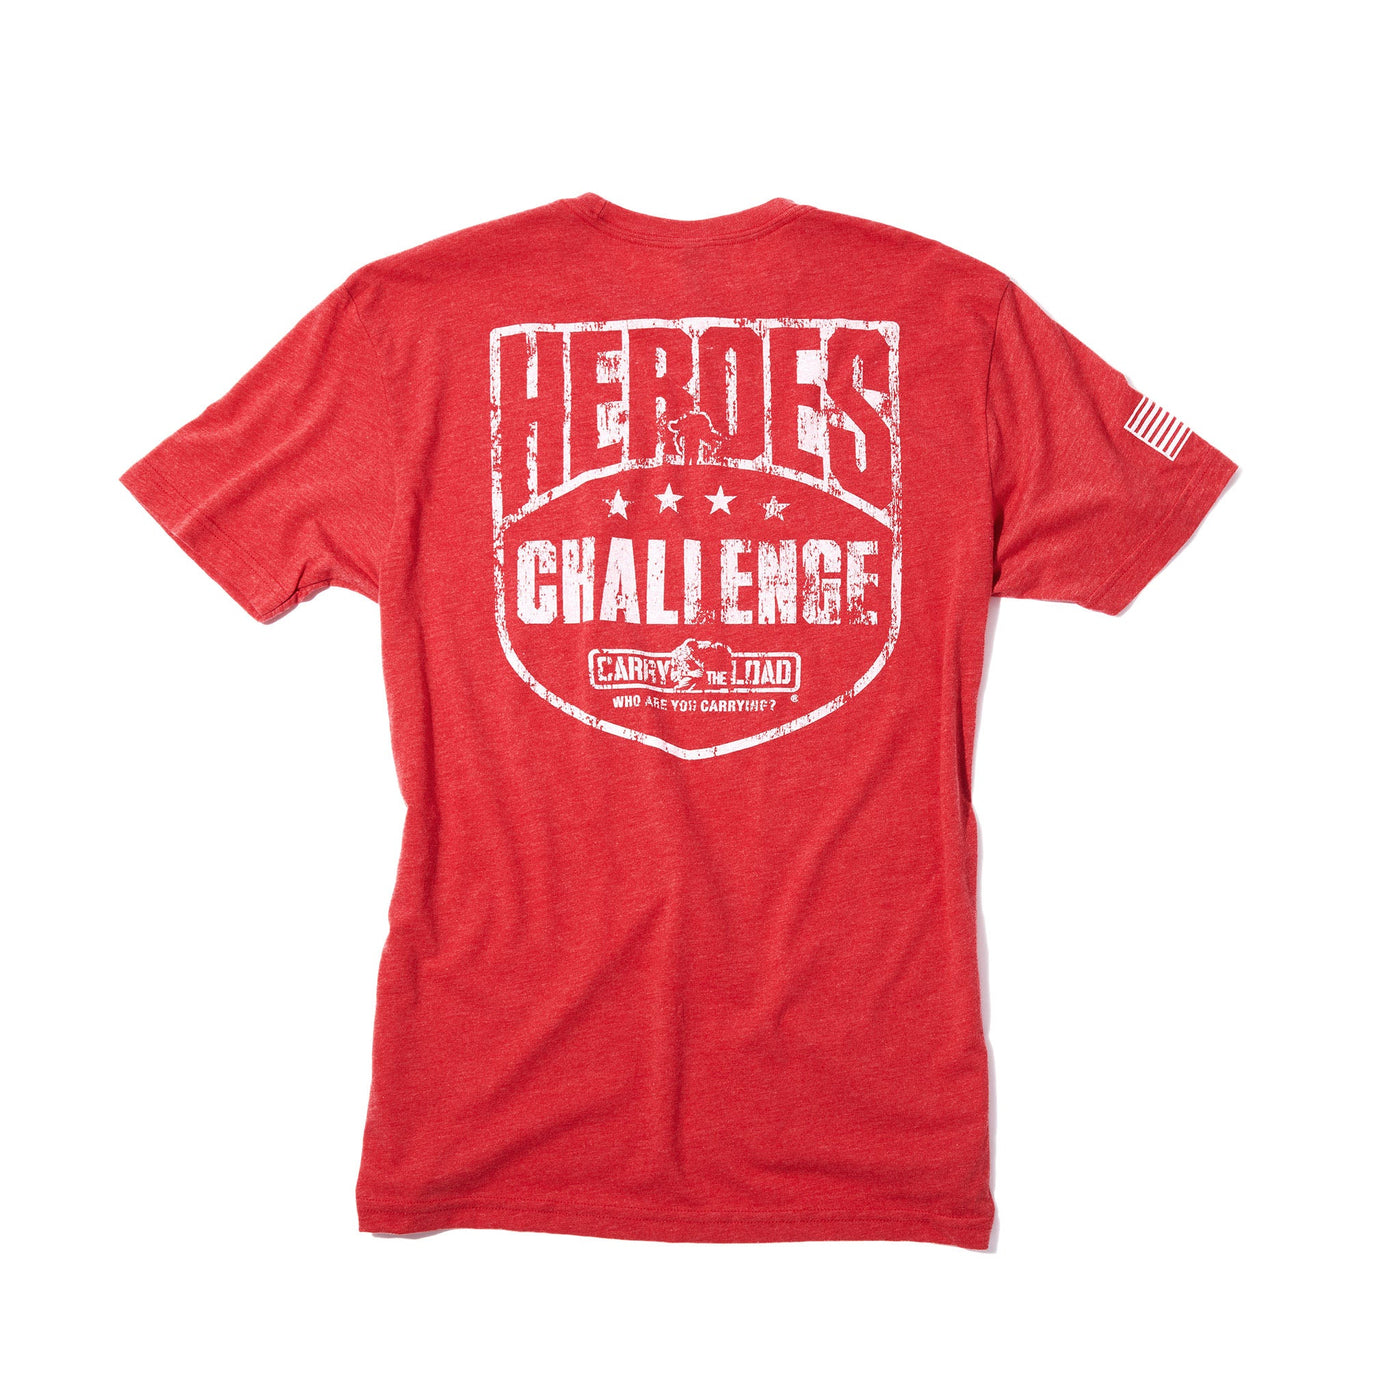 2021 Heroes Challenge Shirt - Carry the Load Shop